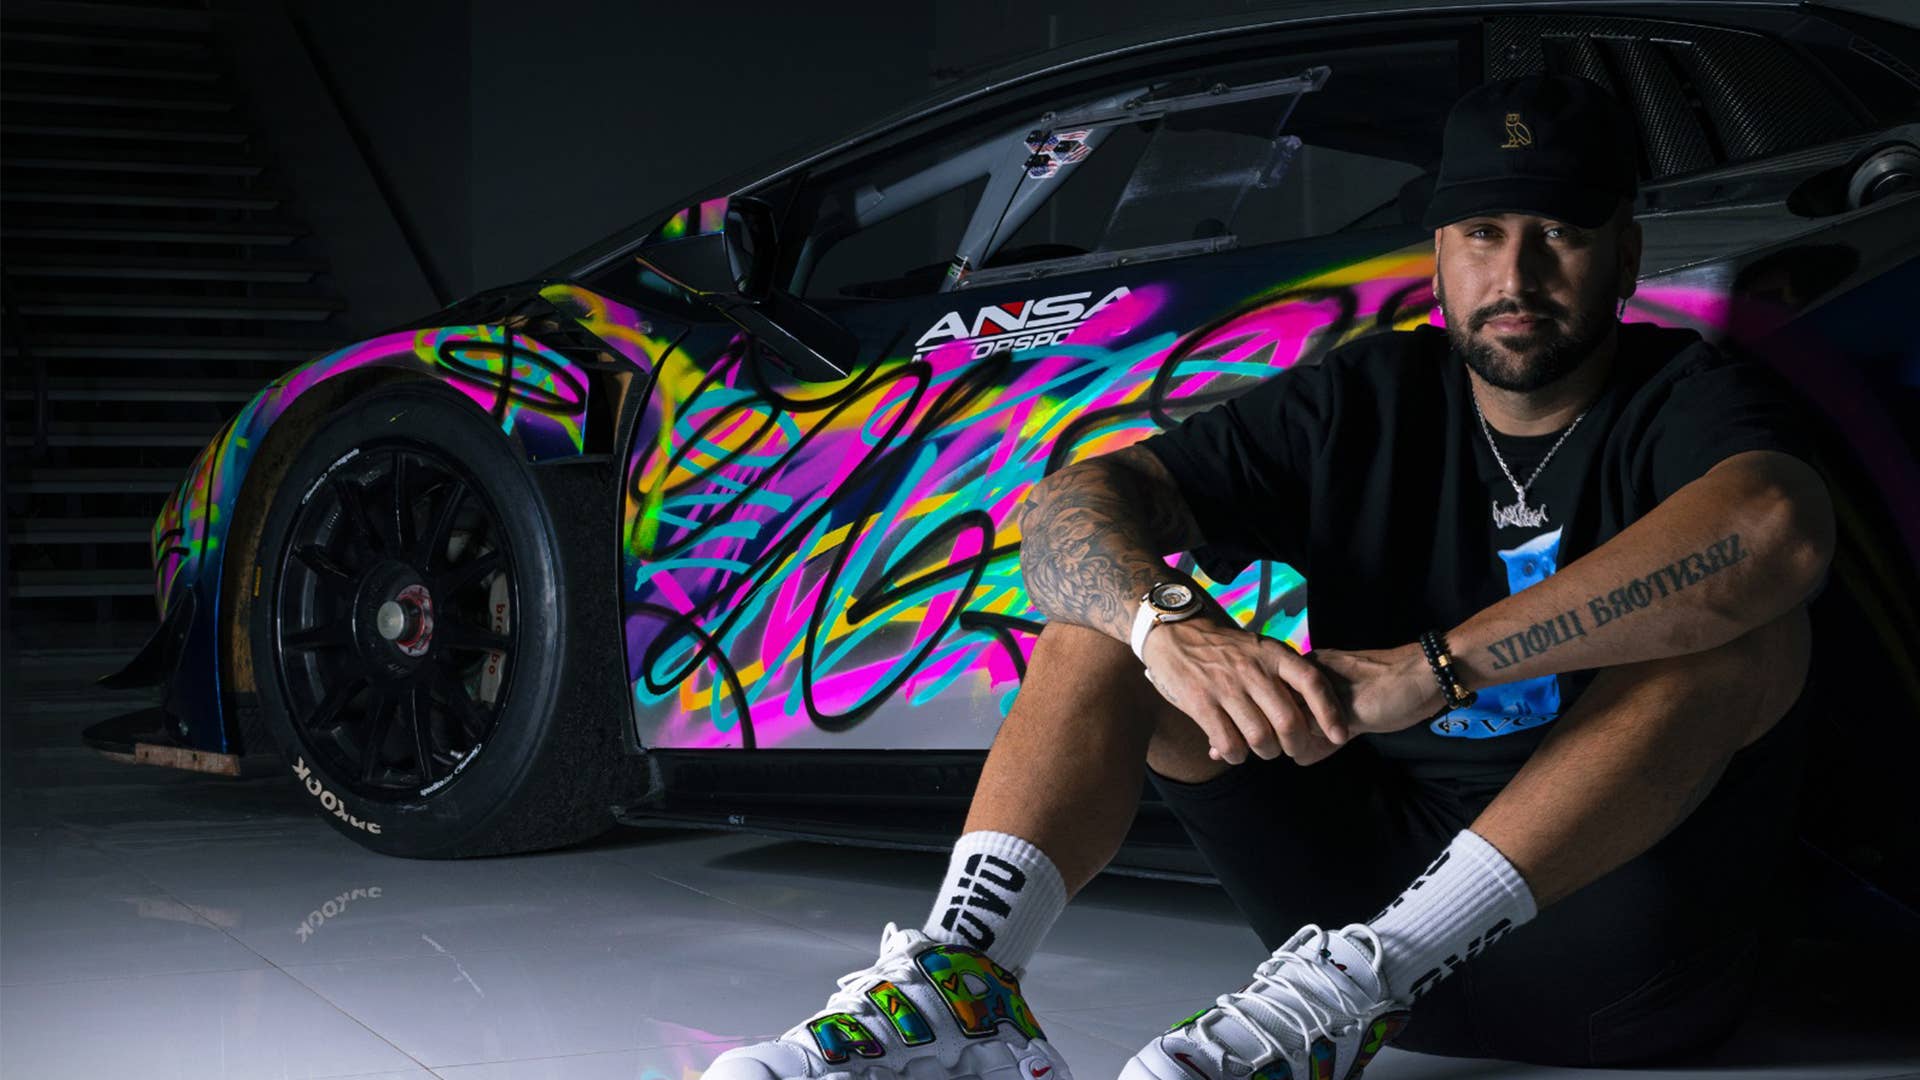 D-Snow in front of a painted lambo